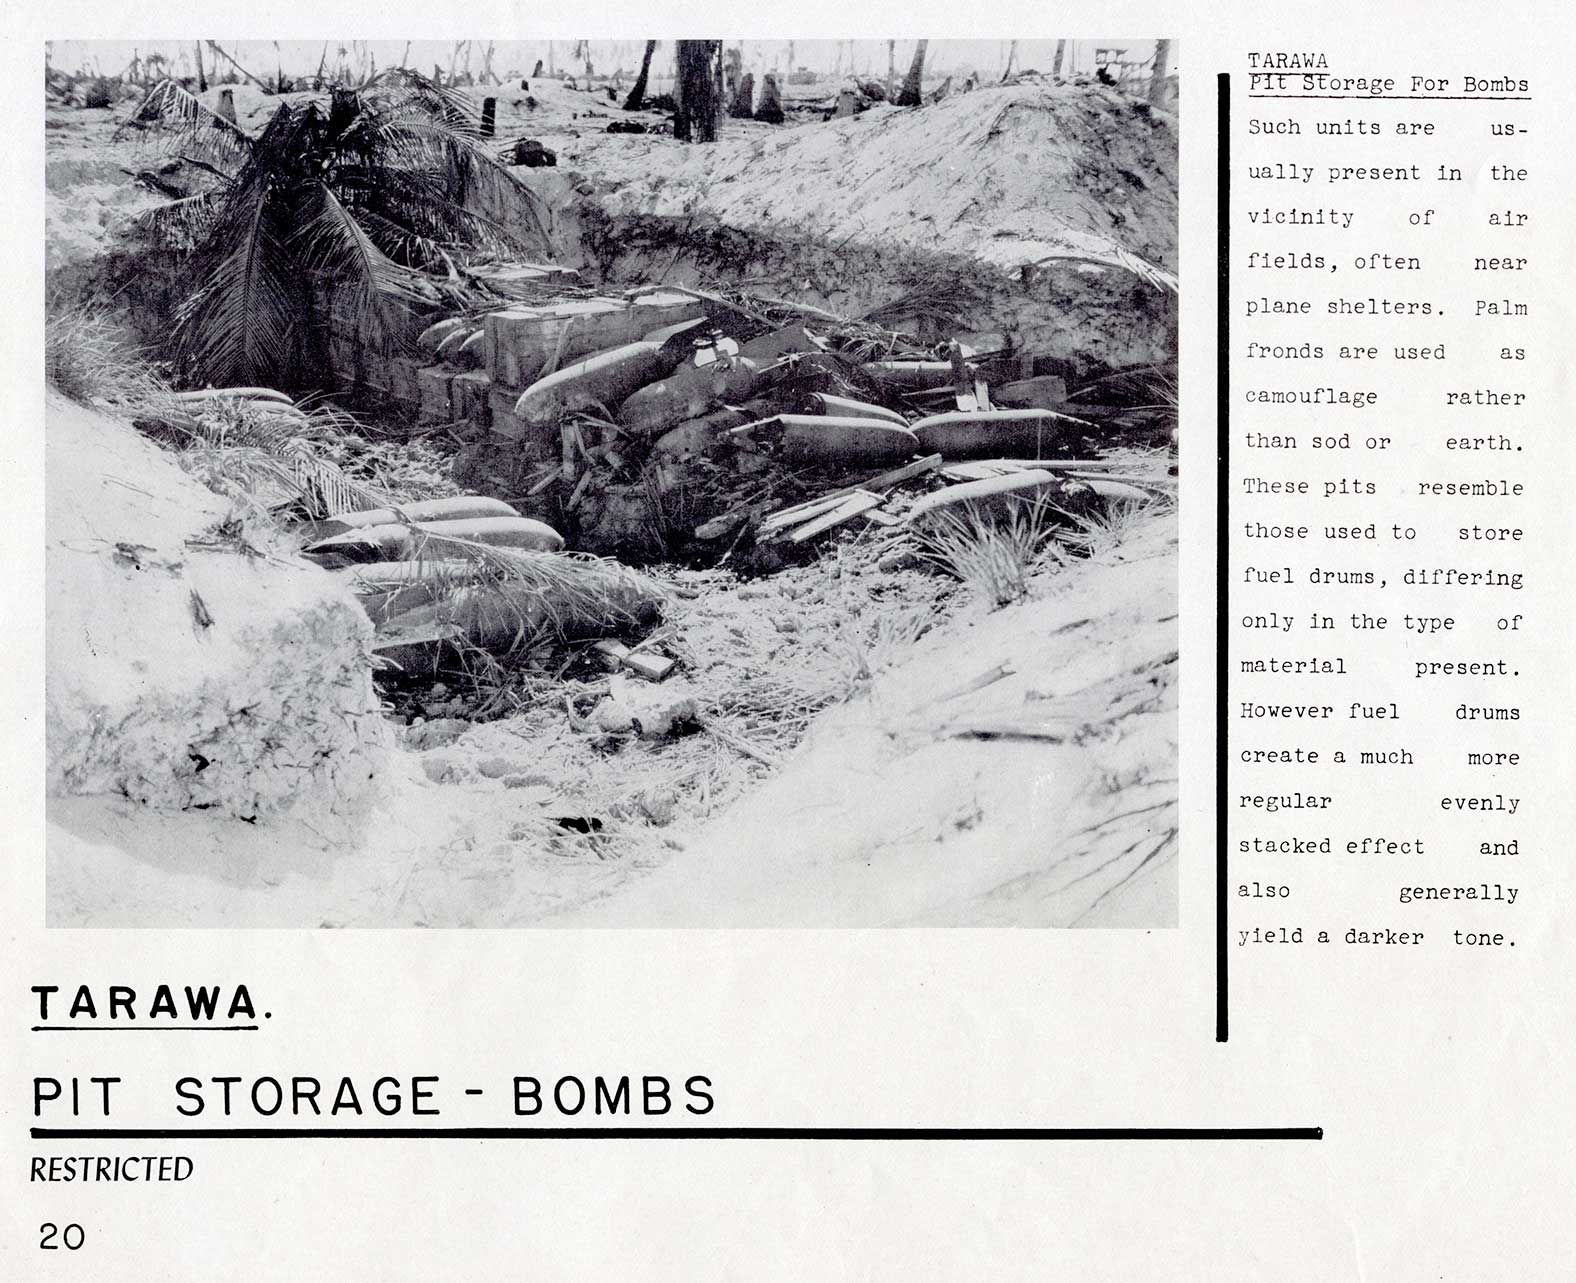 PIT STORAGE - BOMBS
TARAWA 
Pit Storage For Bombs Such units are usually present in the vicinity of air fields, often near plane shelters. Palm fronds are used as camouflage rather than sod or earth. These pits resemble those used to store fuel drums, differing only in the type of material present. However fuel drums create a much more regular evenly stacked effect and also generally yield a darker tone.
20
